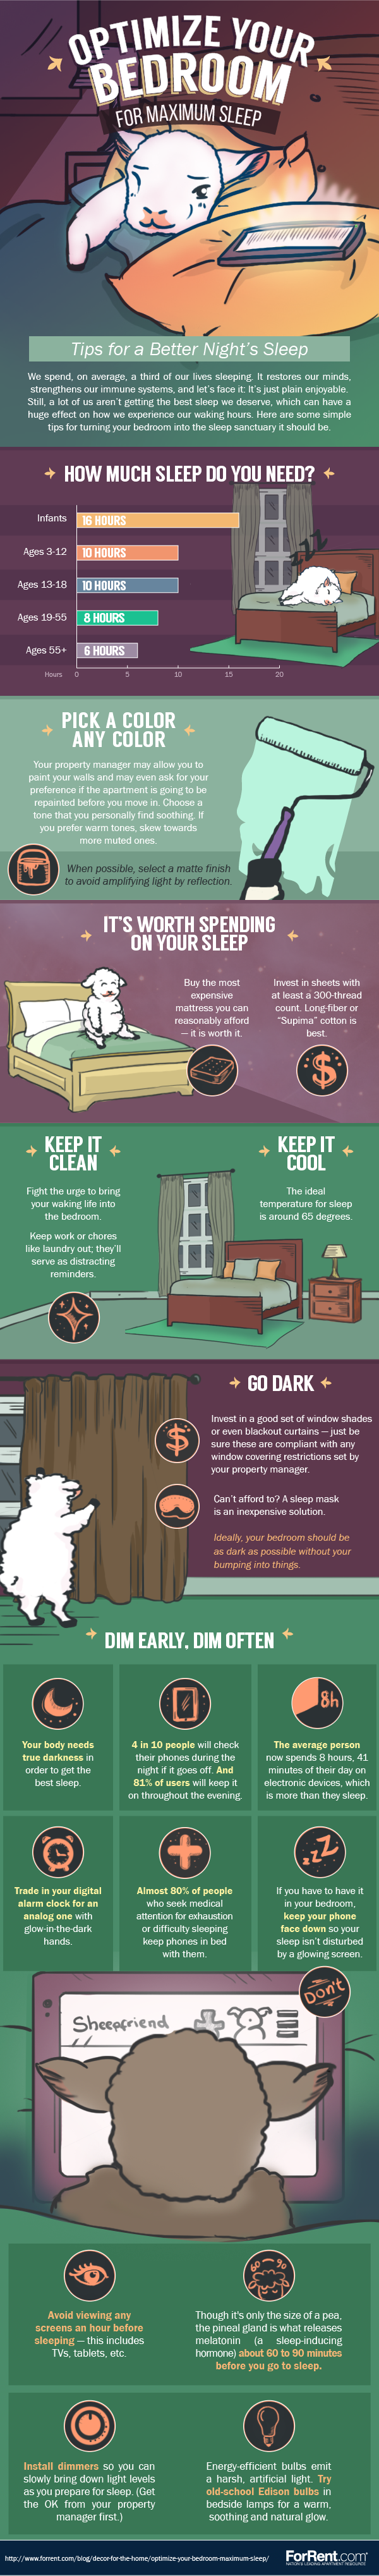 How To Optimize Your Bedroom for Maximum Sleep